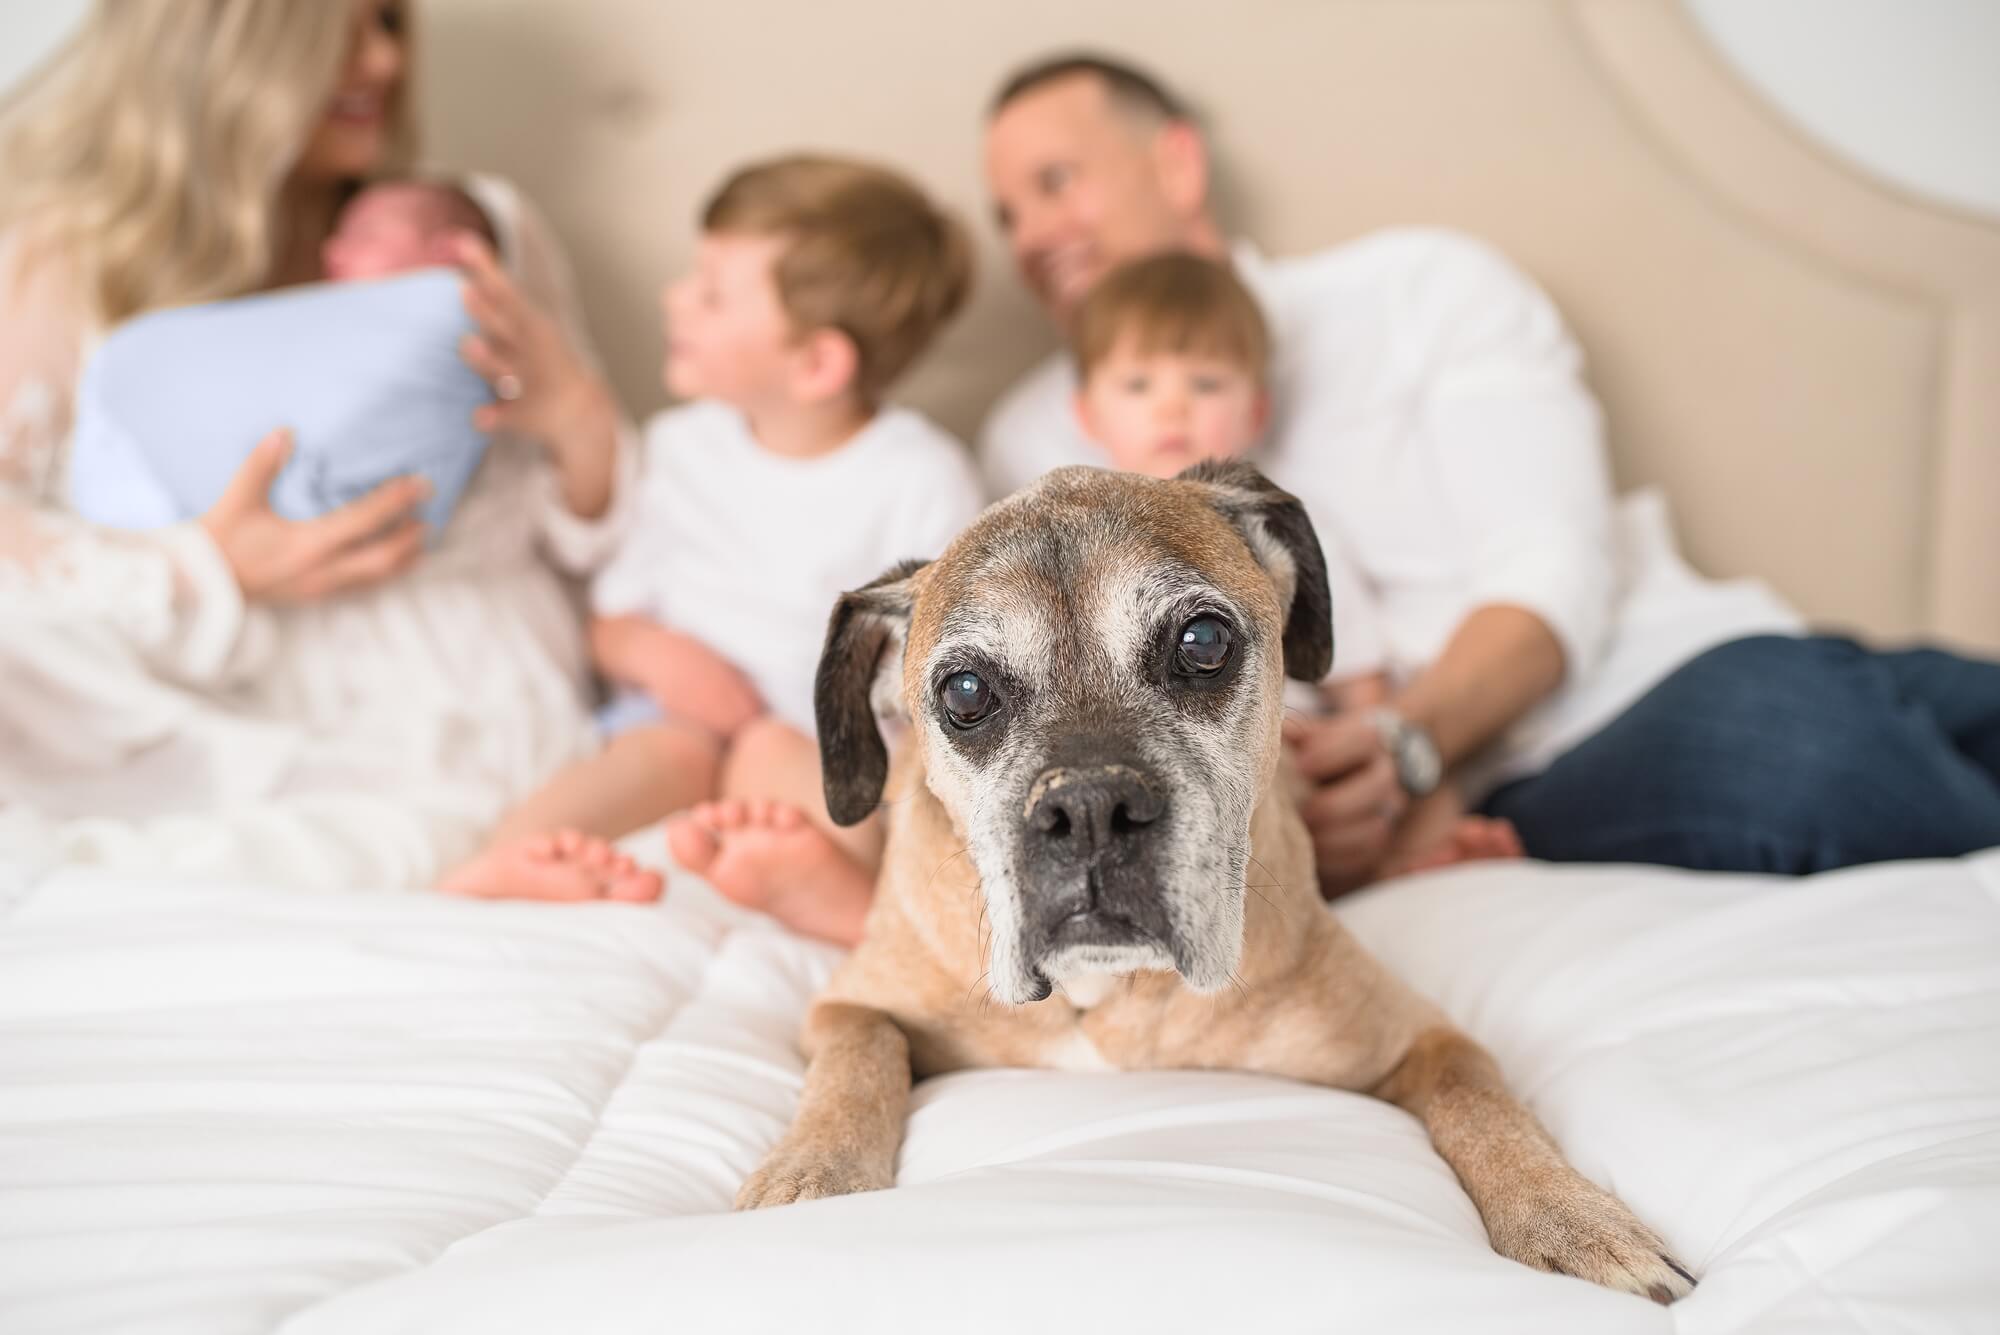 family on bed with newborn, focus on dog